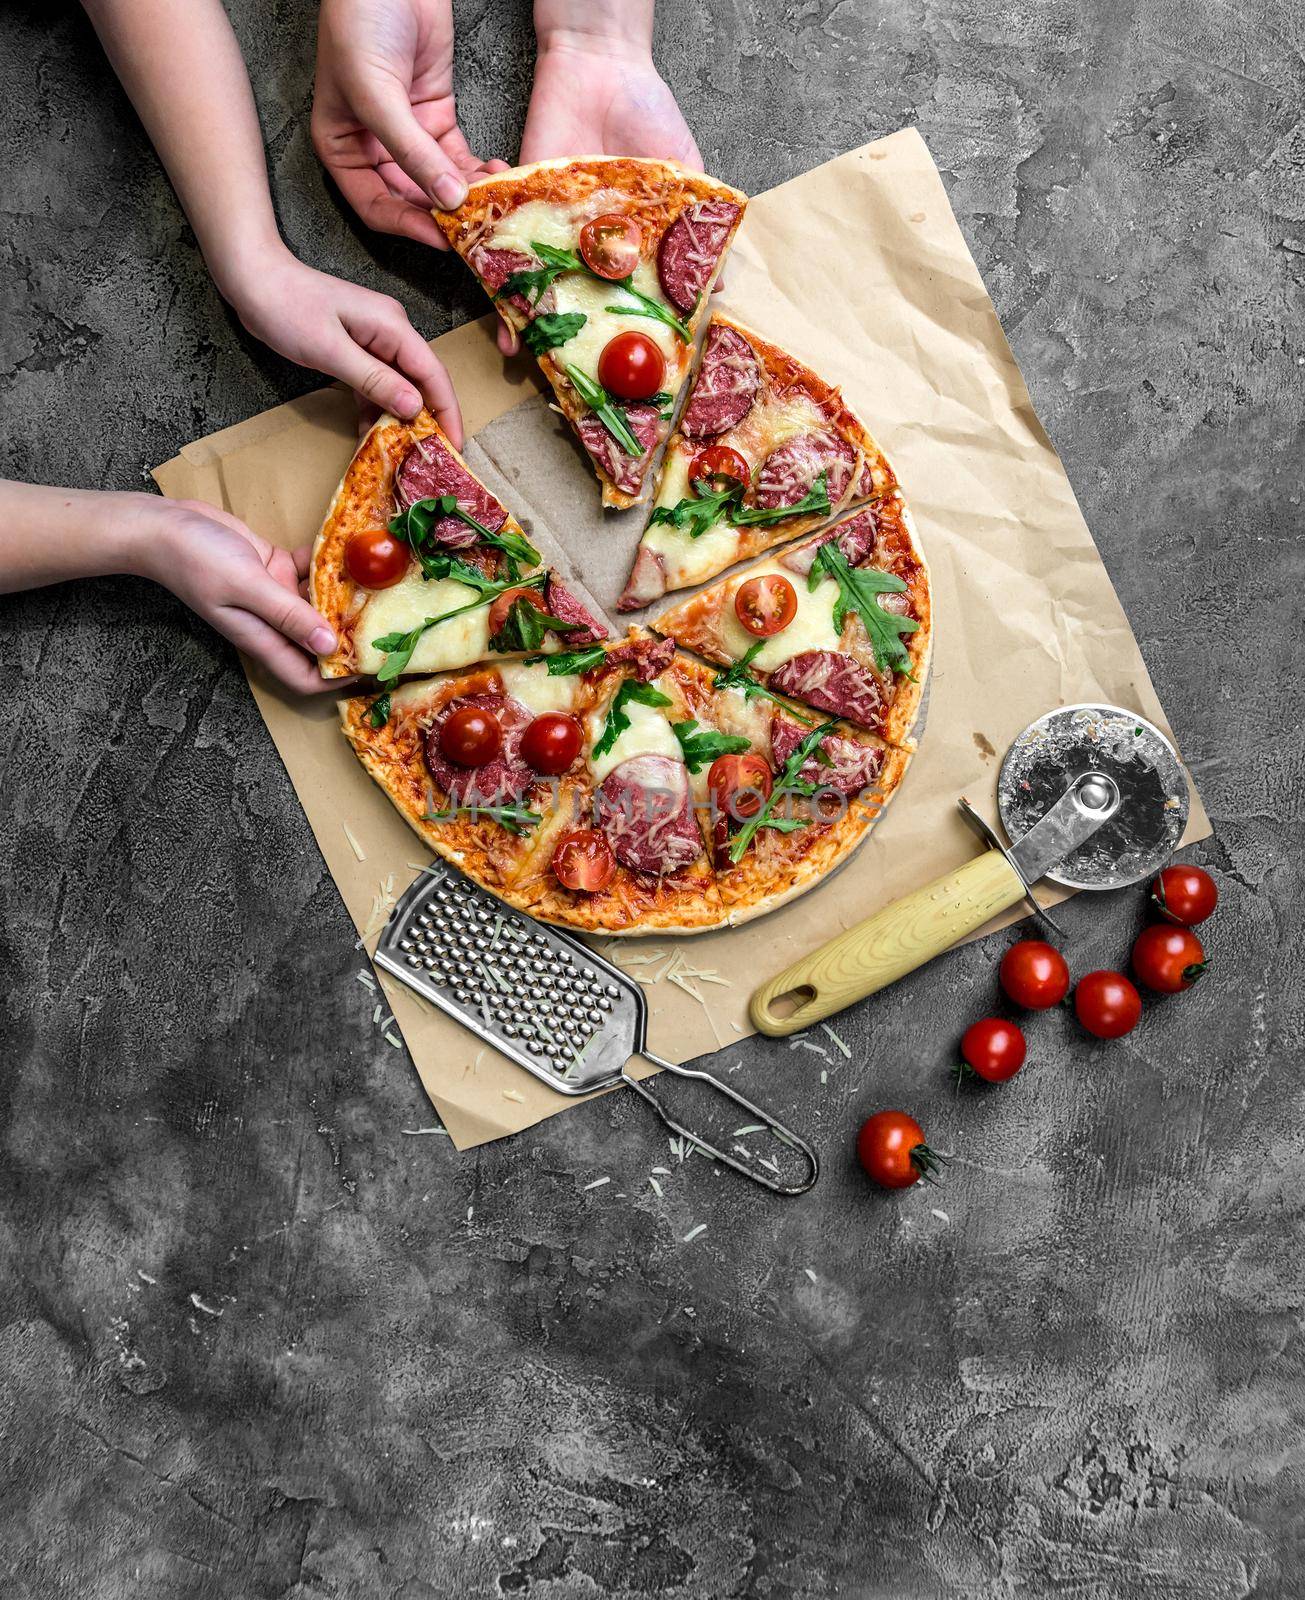 children's hands take homemade pizza with salami, cherry tomatoes and rucola